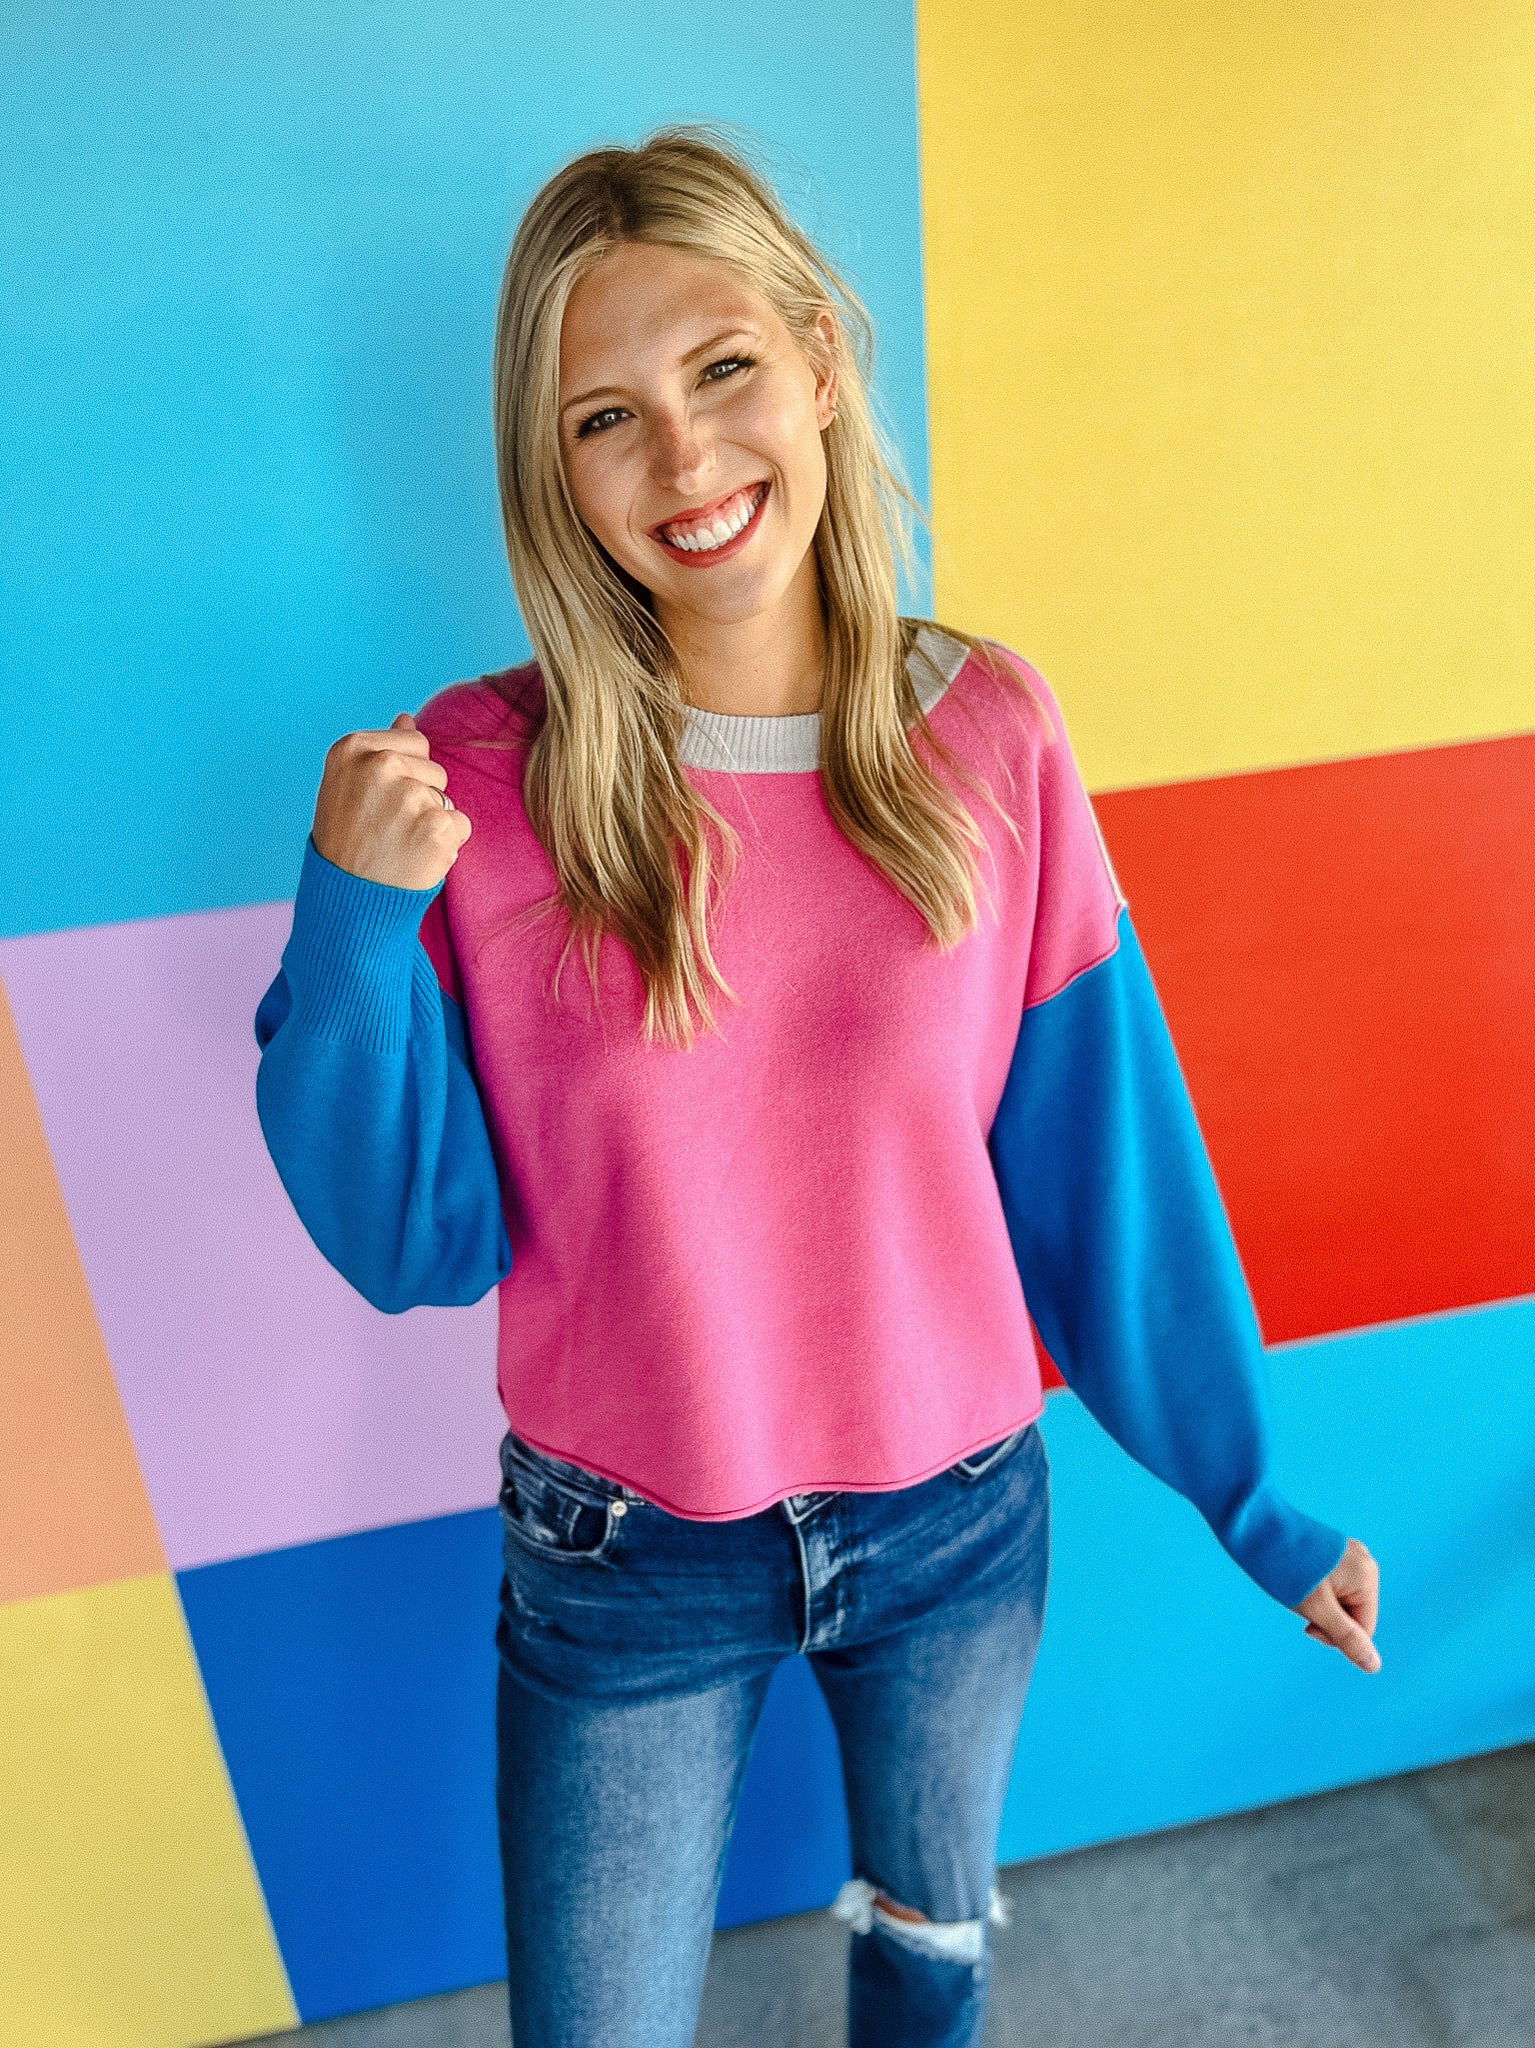 Nell Colorblock Sweater - Shocking Pink + Dove Grey + Turquoise